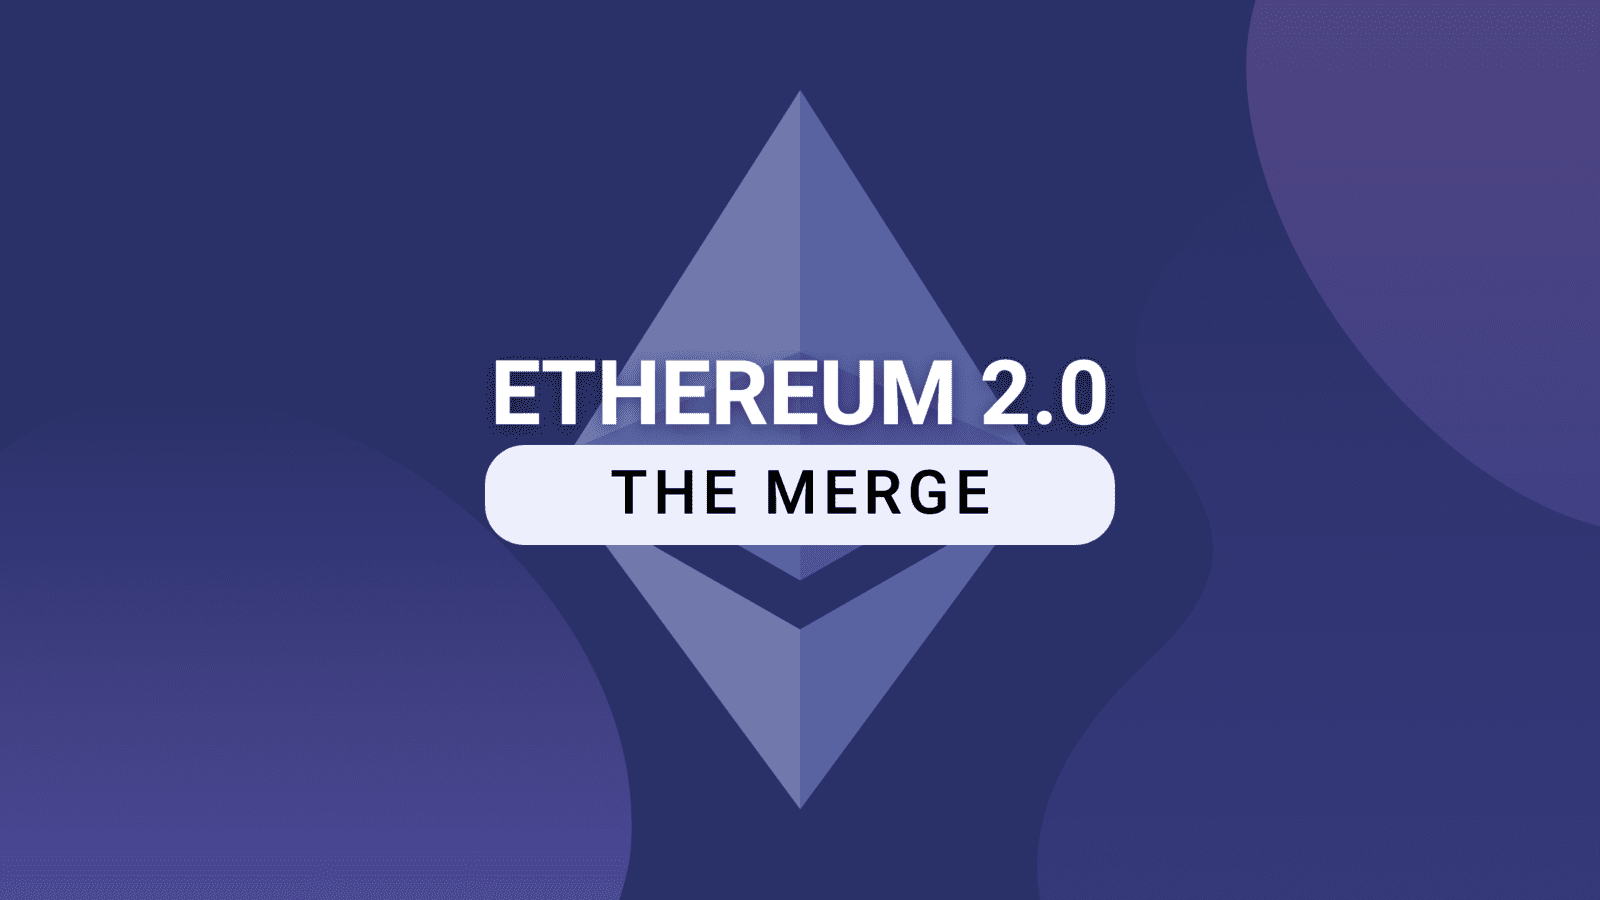 The Ethereum Merge is one of the most impactful events in crypto history